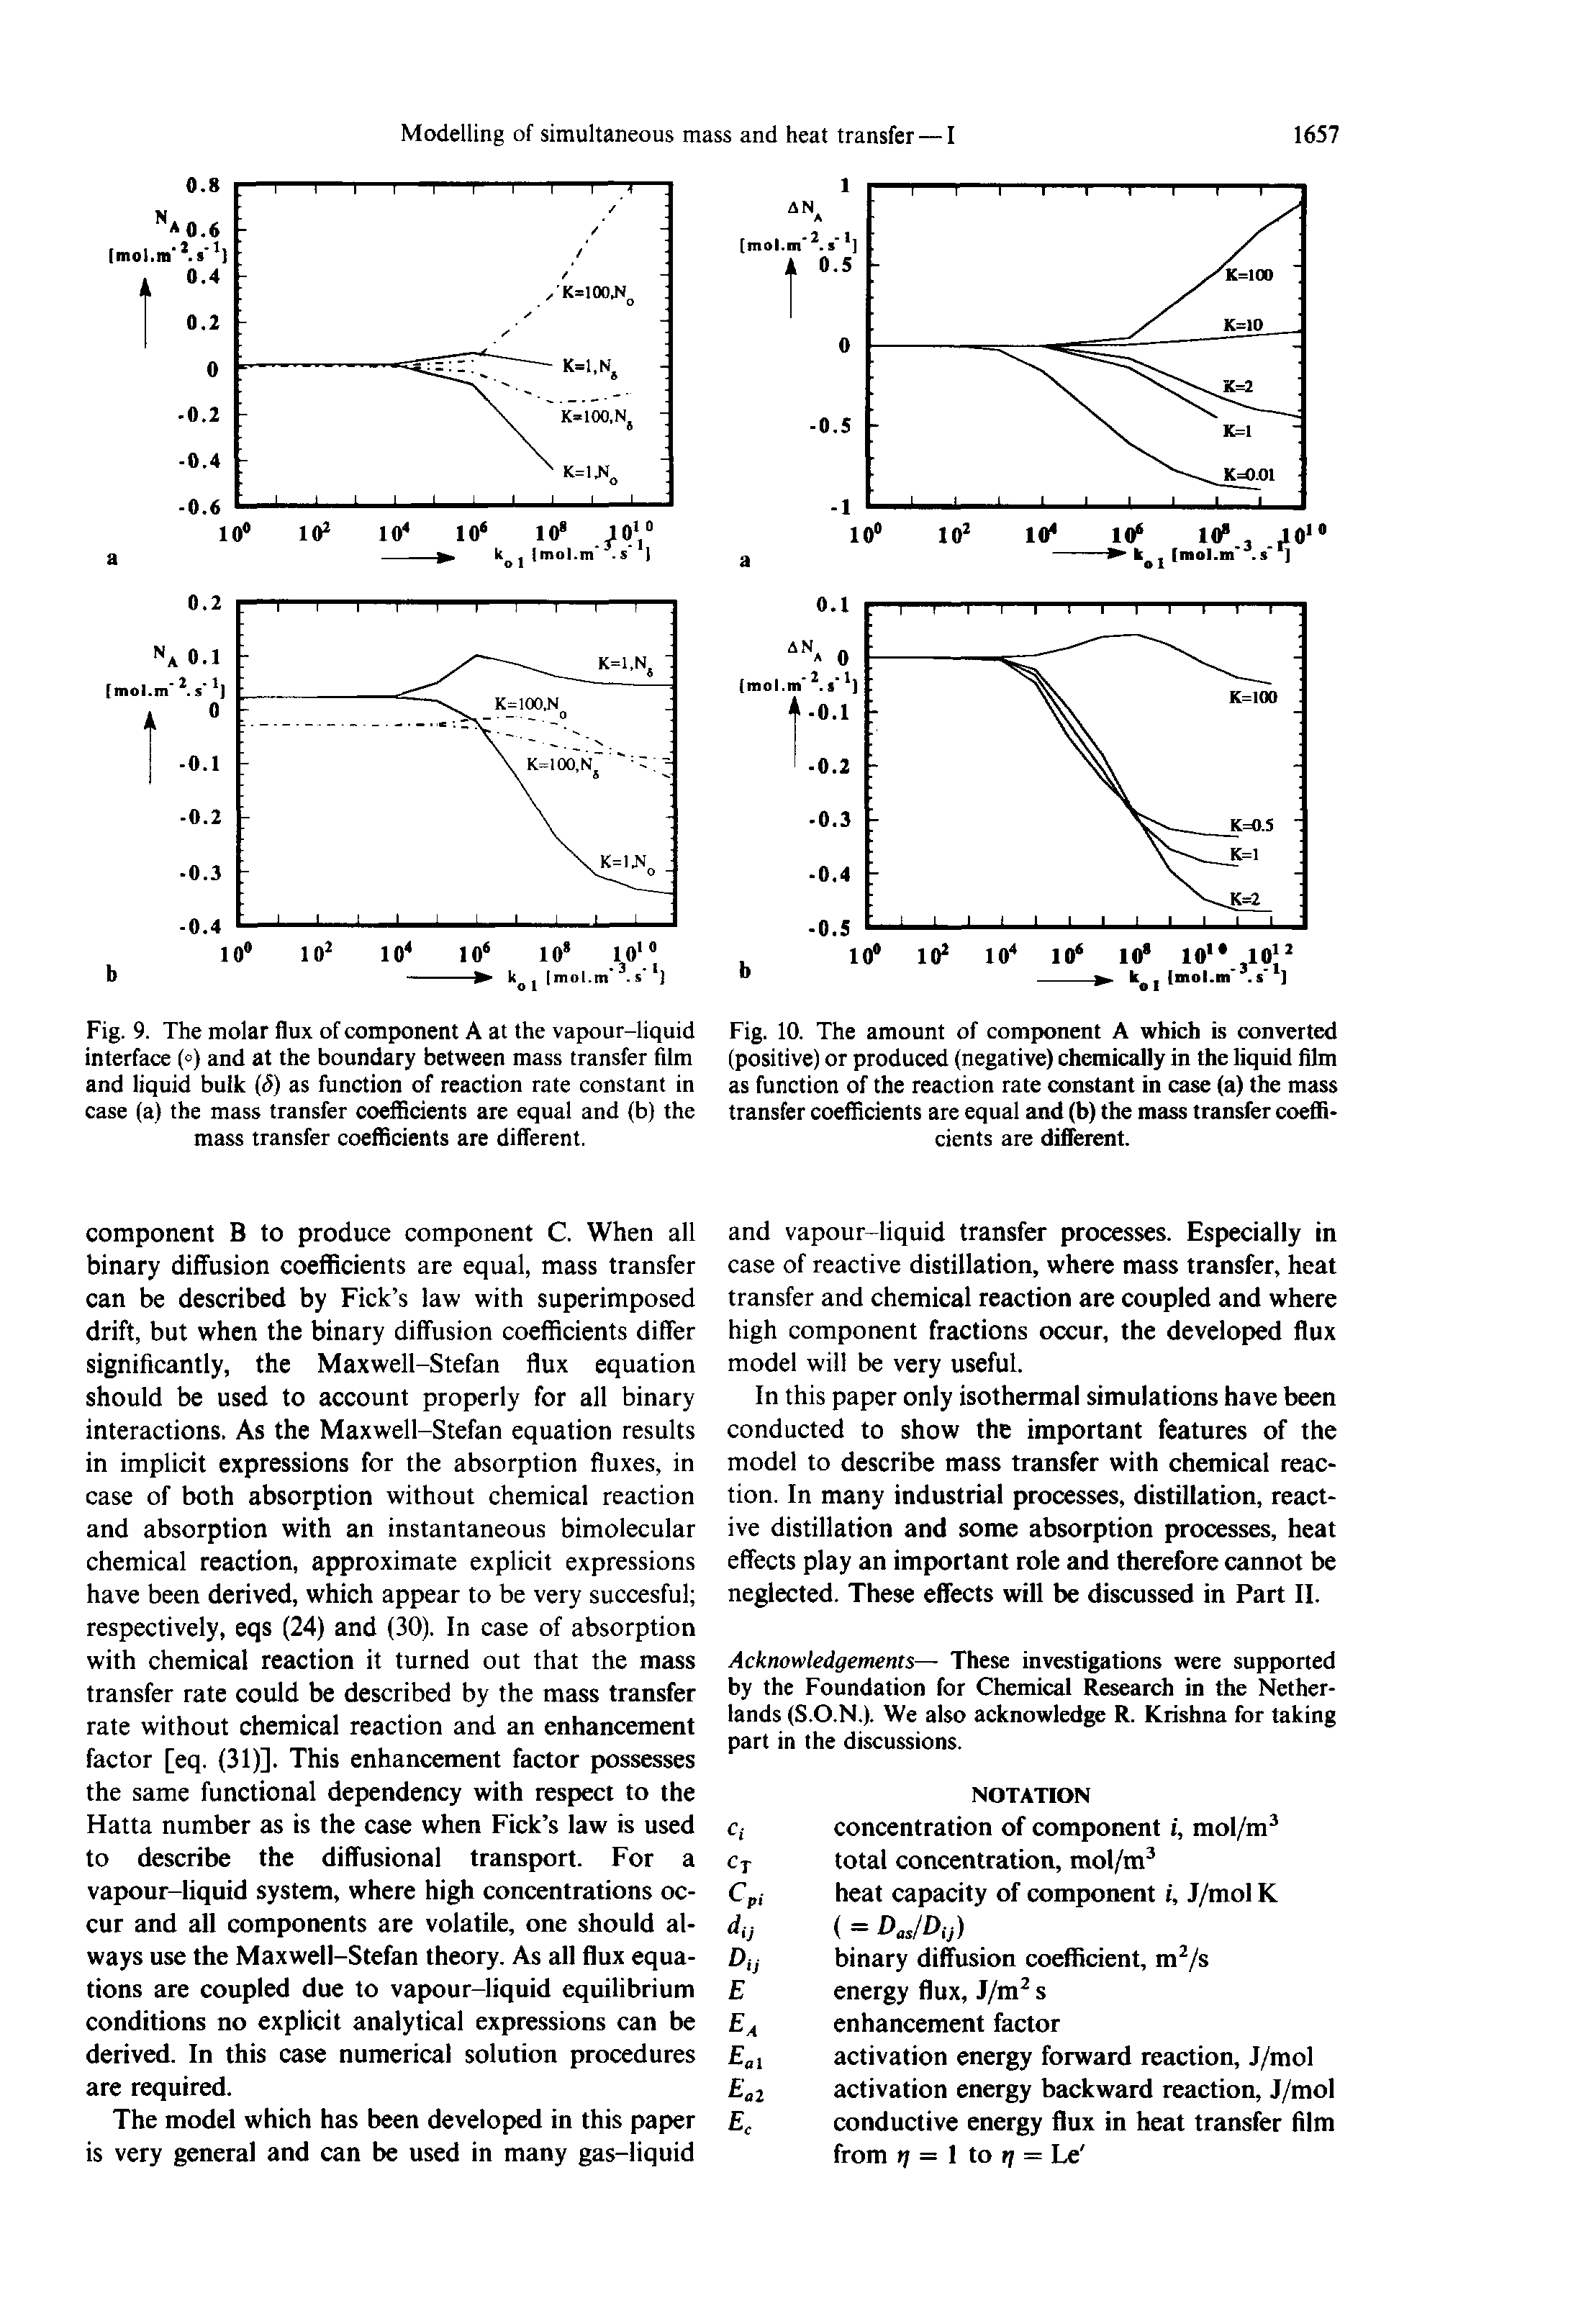 Fig. 9. The molar flux of component A at the vapour-liquid interface (°) and at the boundary between mass transfer film and liquid bulk (S) as function of reaction rate constant in case (a) the mass transfer coefficients are equal and (b) the mass transfer coefficients are different.